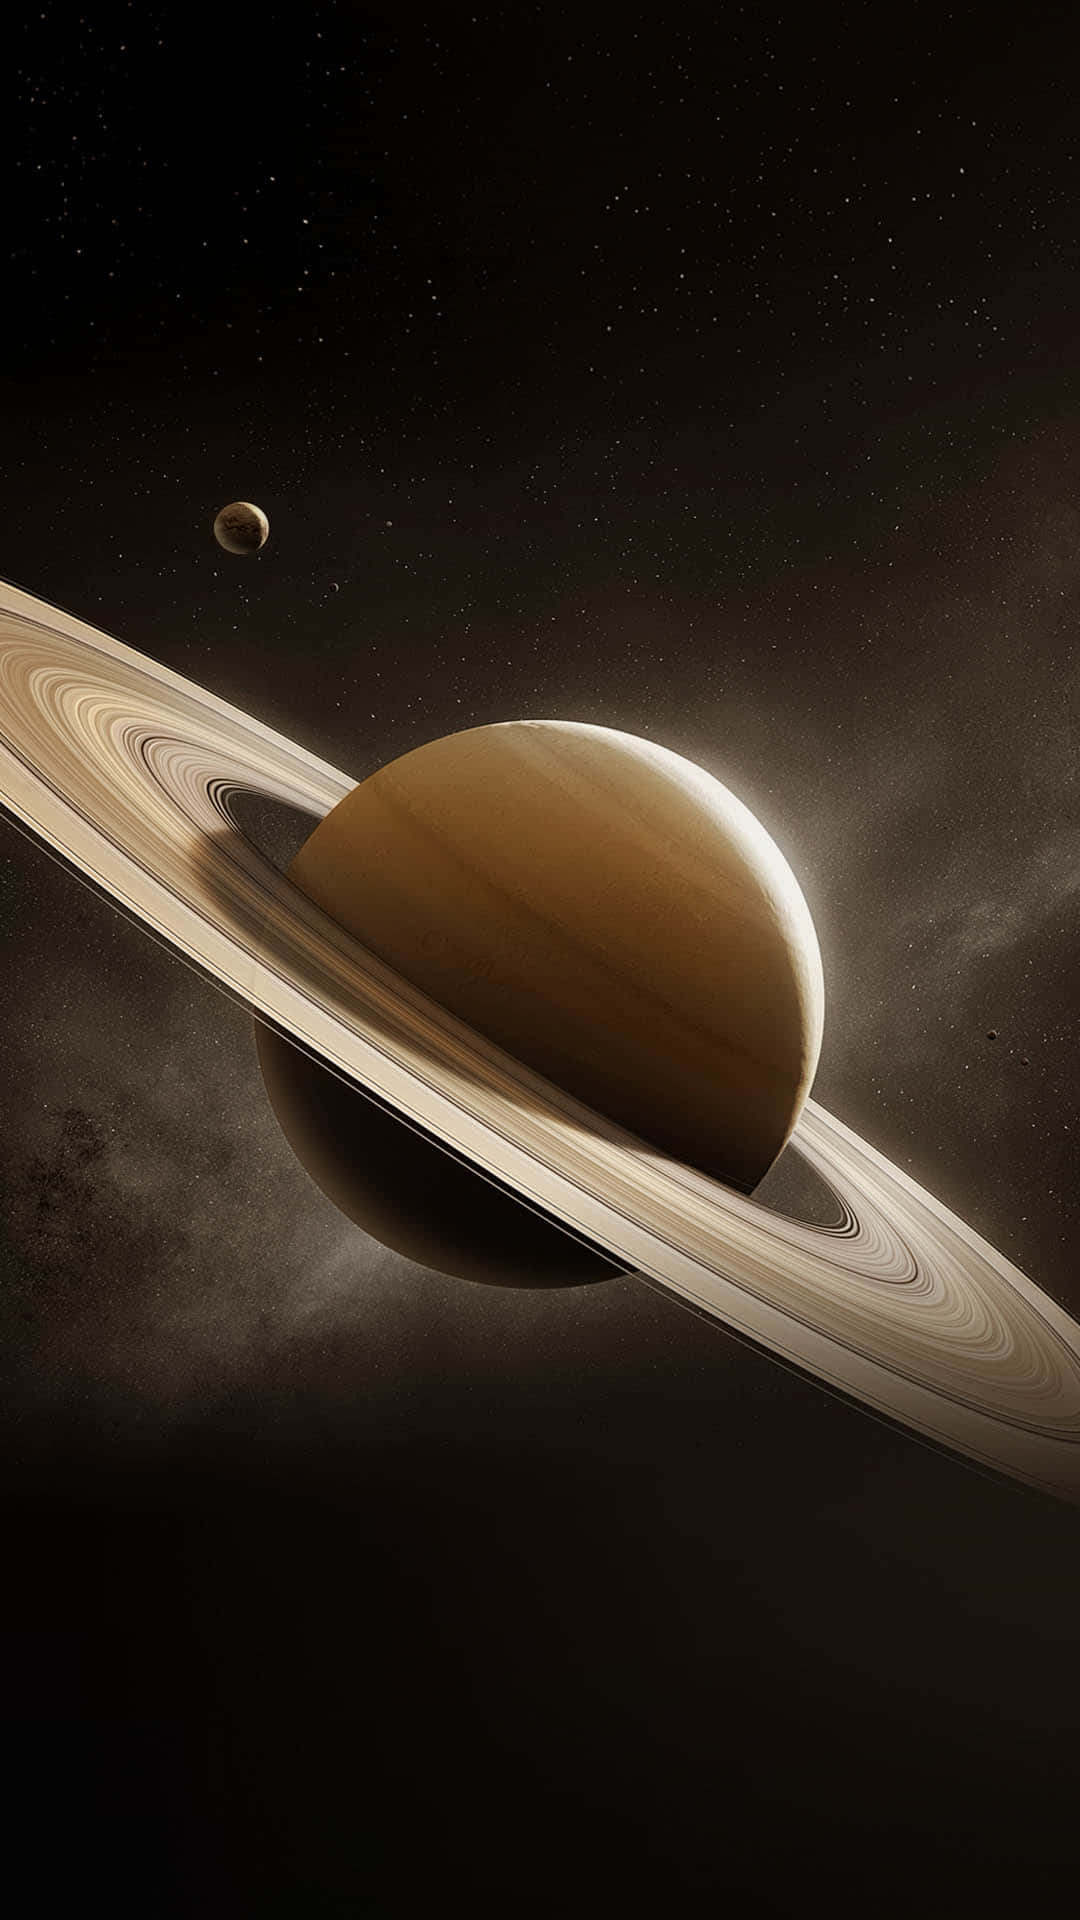 Stunning View of Saturn in Space